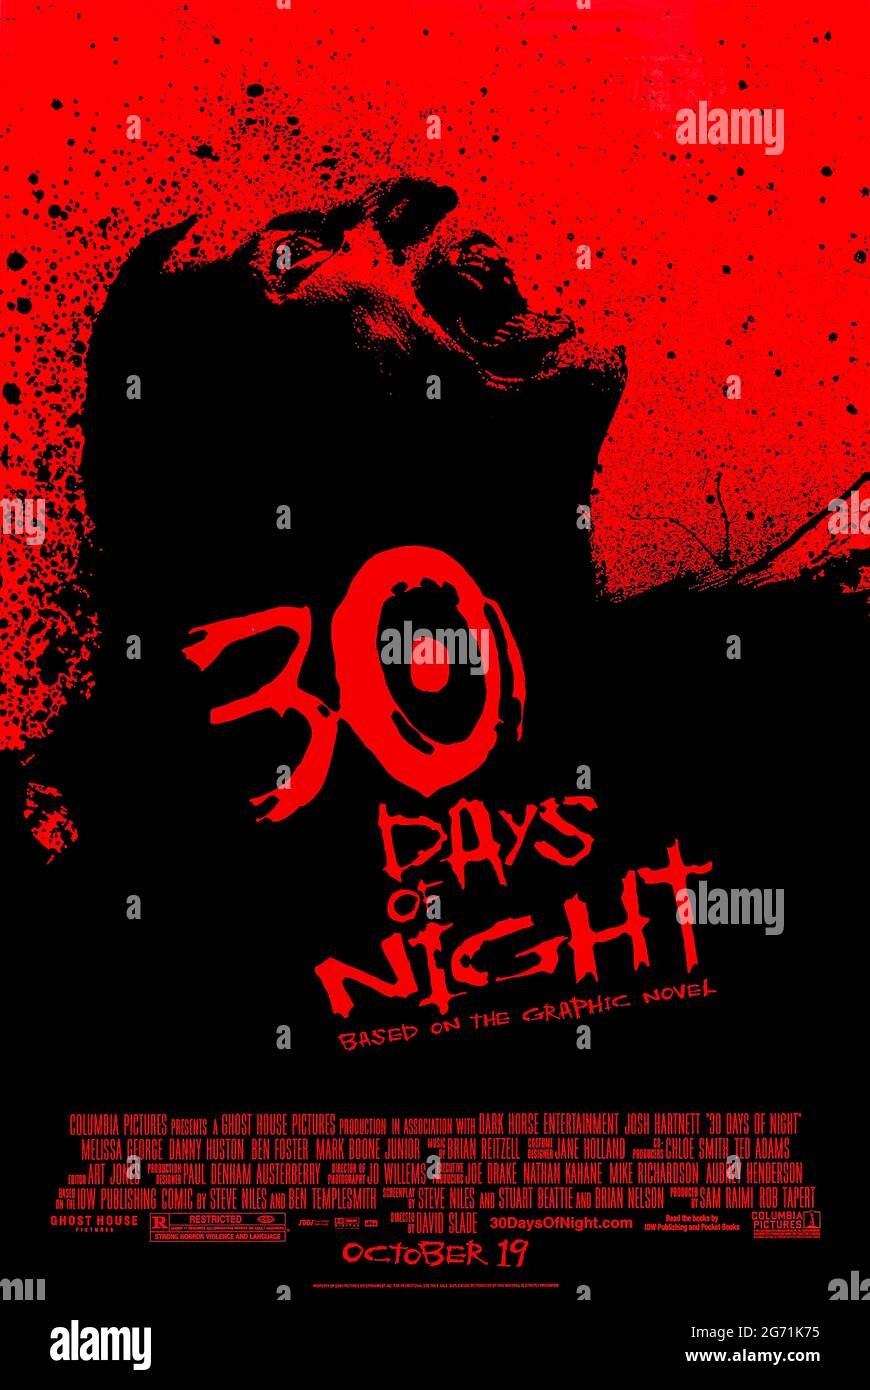 30 Days of Night (2007) directed by David Slade and starring Josh Hartnett, Melissa George and Danny Huston. Based on a graphic novel, a small town sheriff comes up against a gang of vampires in his Alaskan town just as it is plunged into darkness for 30 days. Stock Photo